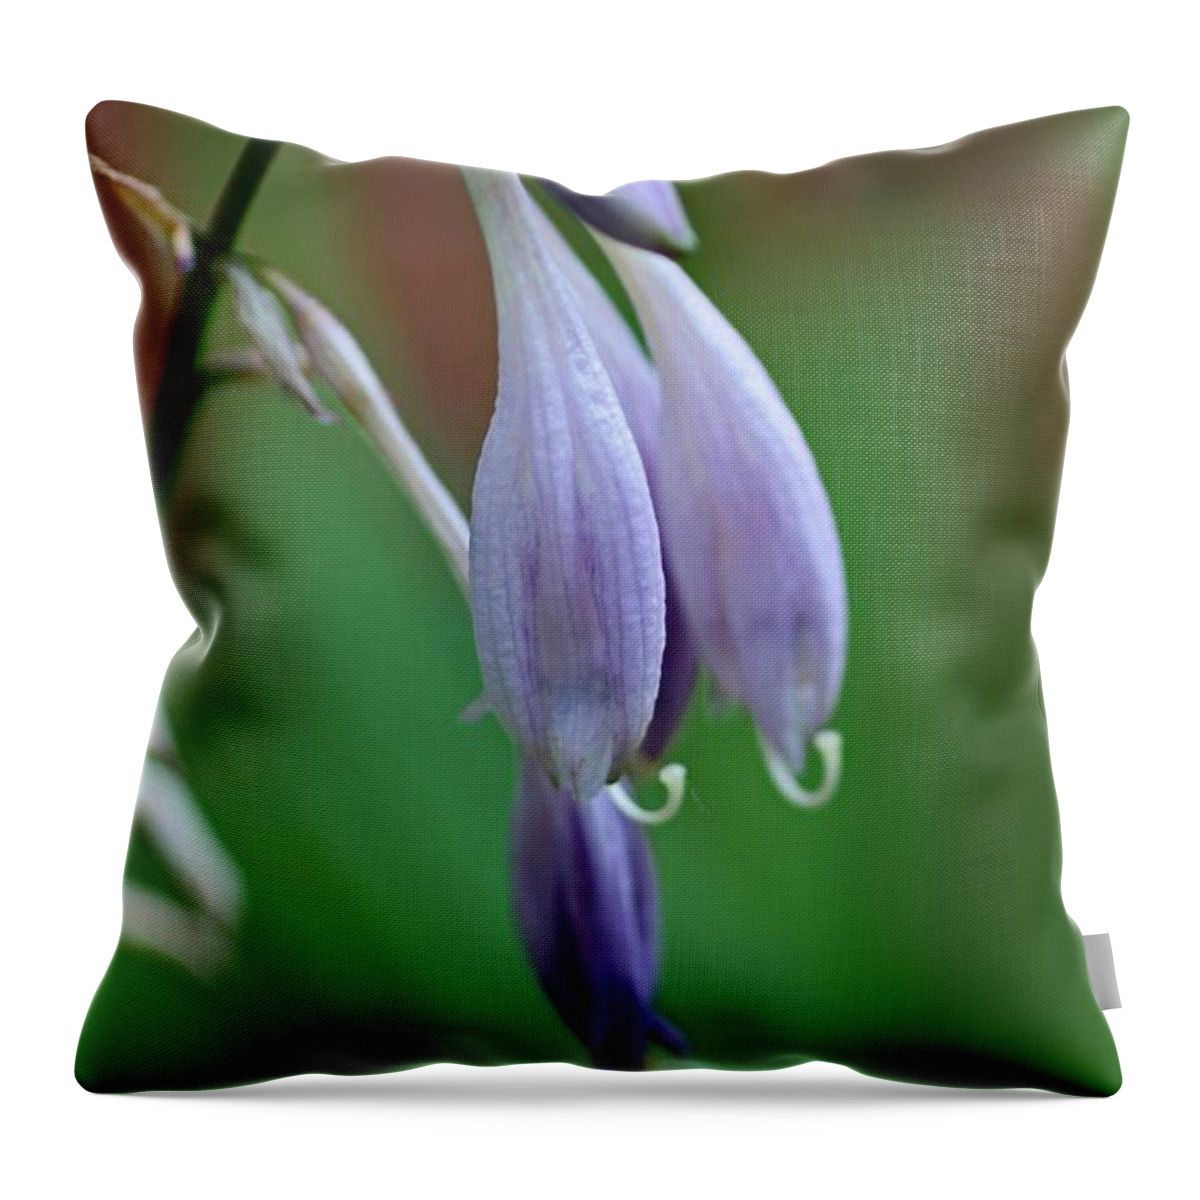 Hosta Throw Pillow featuring the photograph April Ends by Michiale Schneider